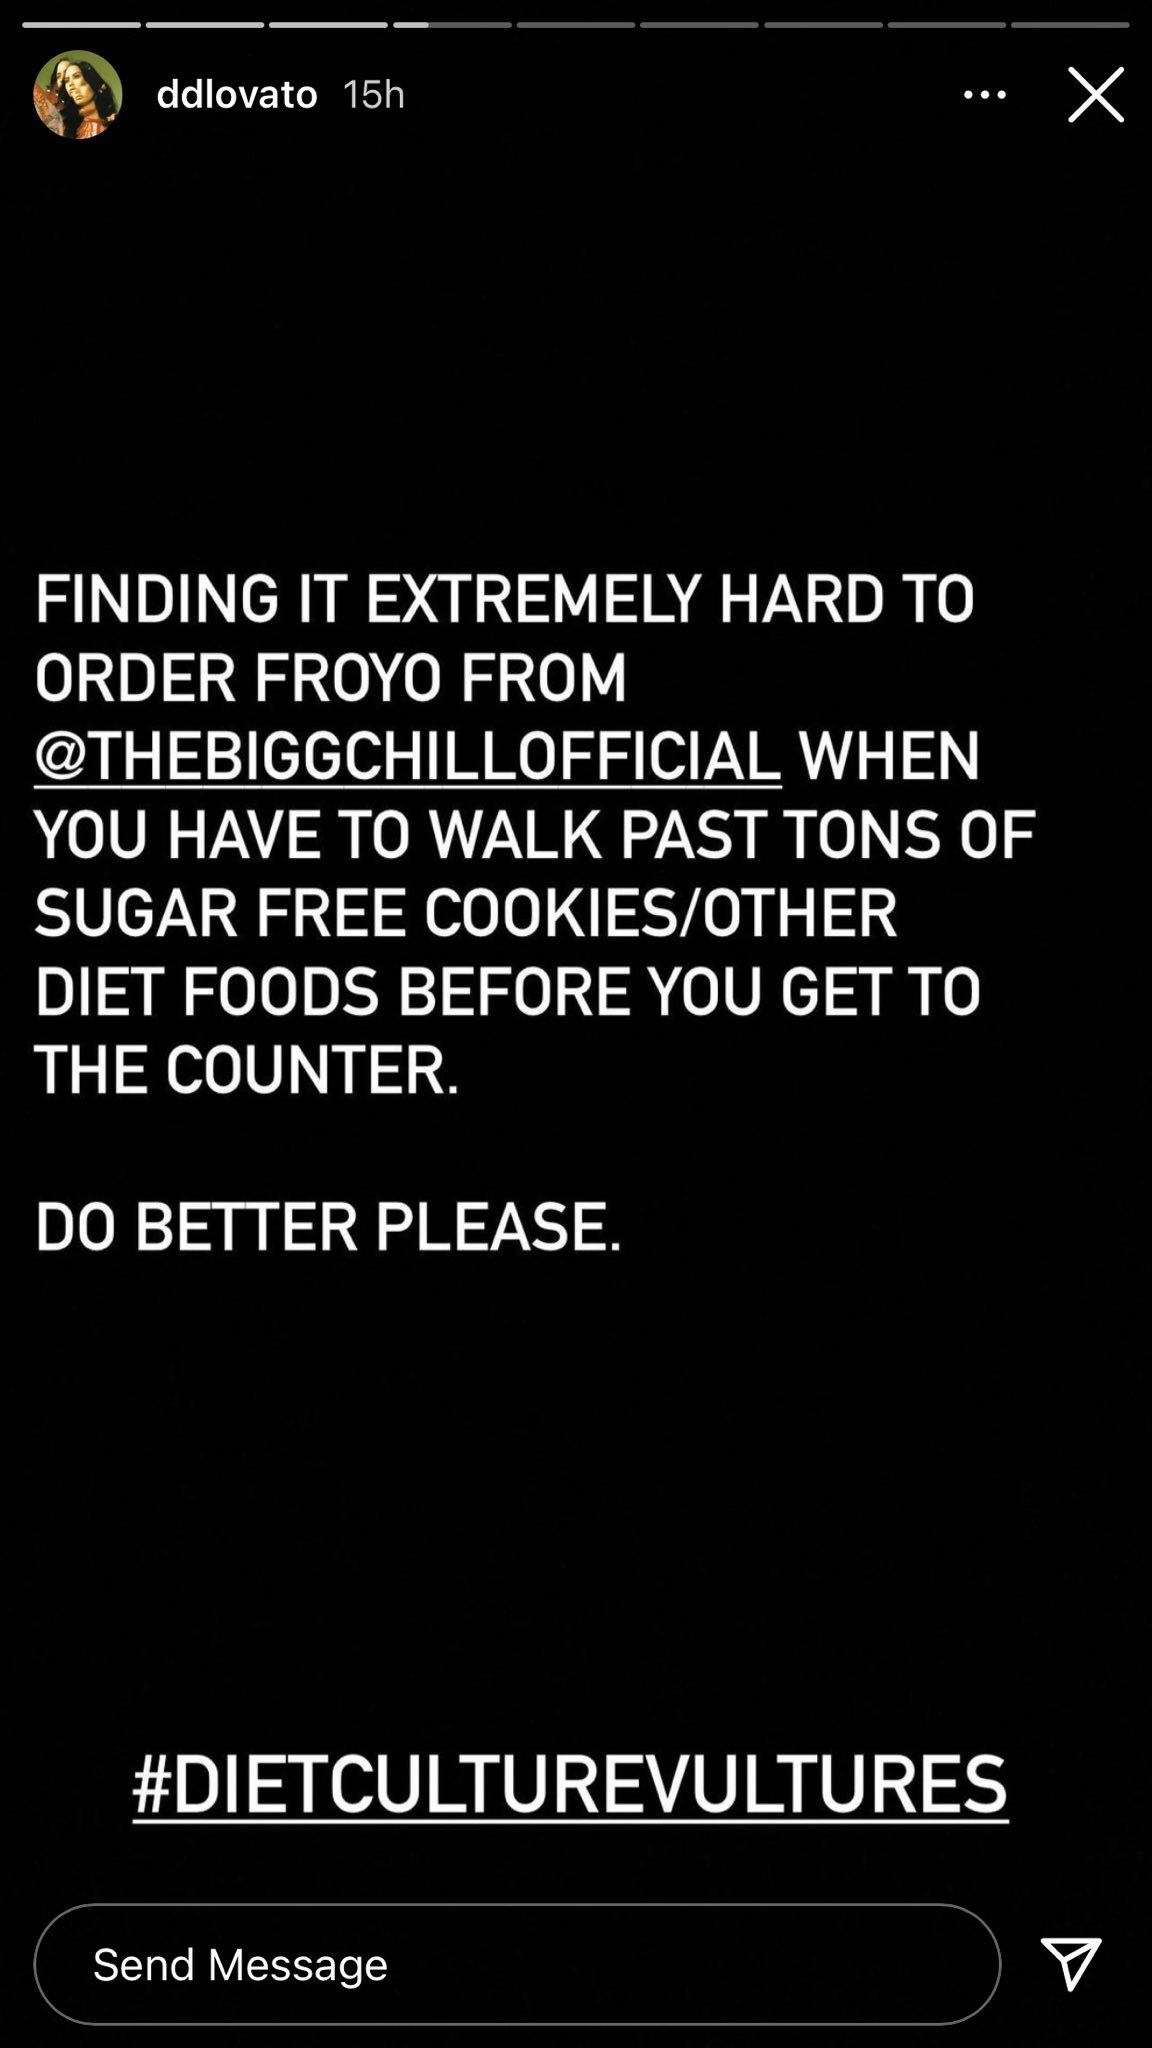 Demi&#x27;s Instagram Story says, &quot;Finding it extremely hard to order fro-yo from The Bigg Chill when you have to walk past tons of sugar-free cookies/other diet foods before you get to the counter; do better please&quot;